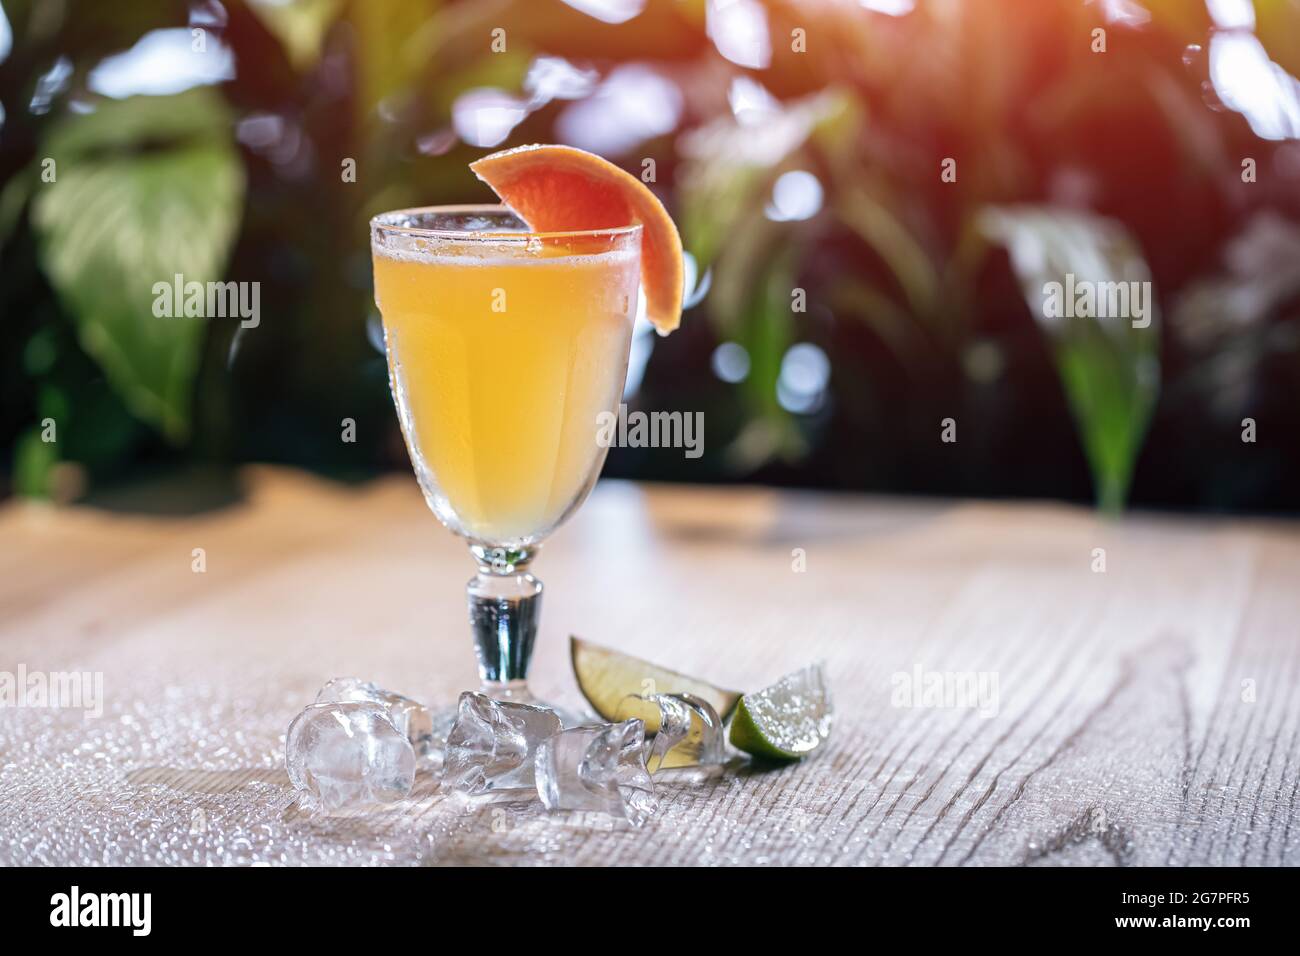 lemonade in glass or refreshing drink with grapefruit, lime and ice on table Stock Photo